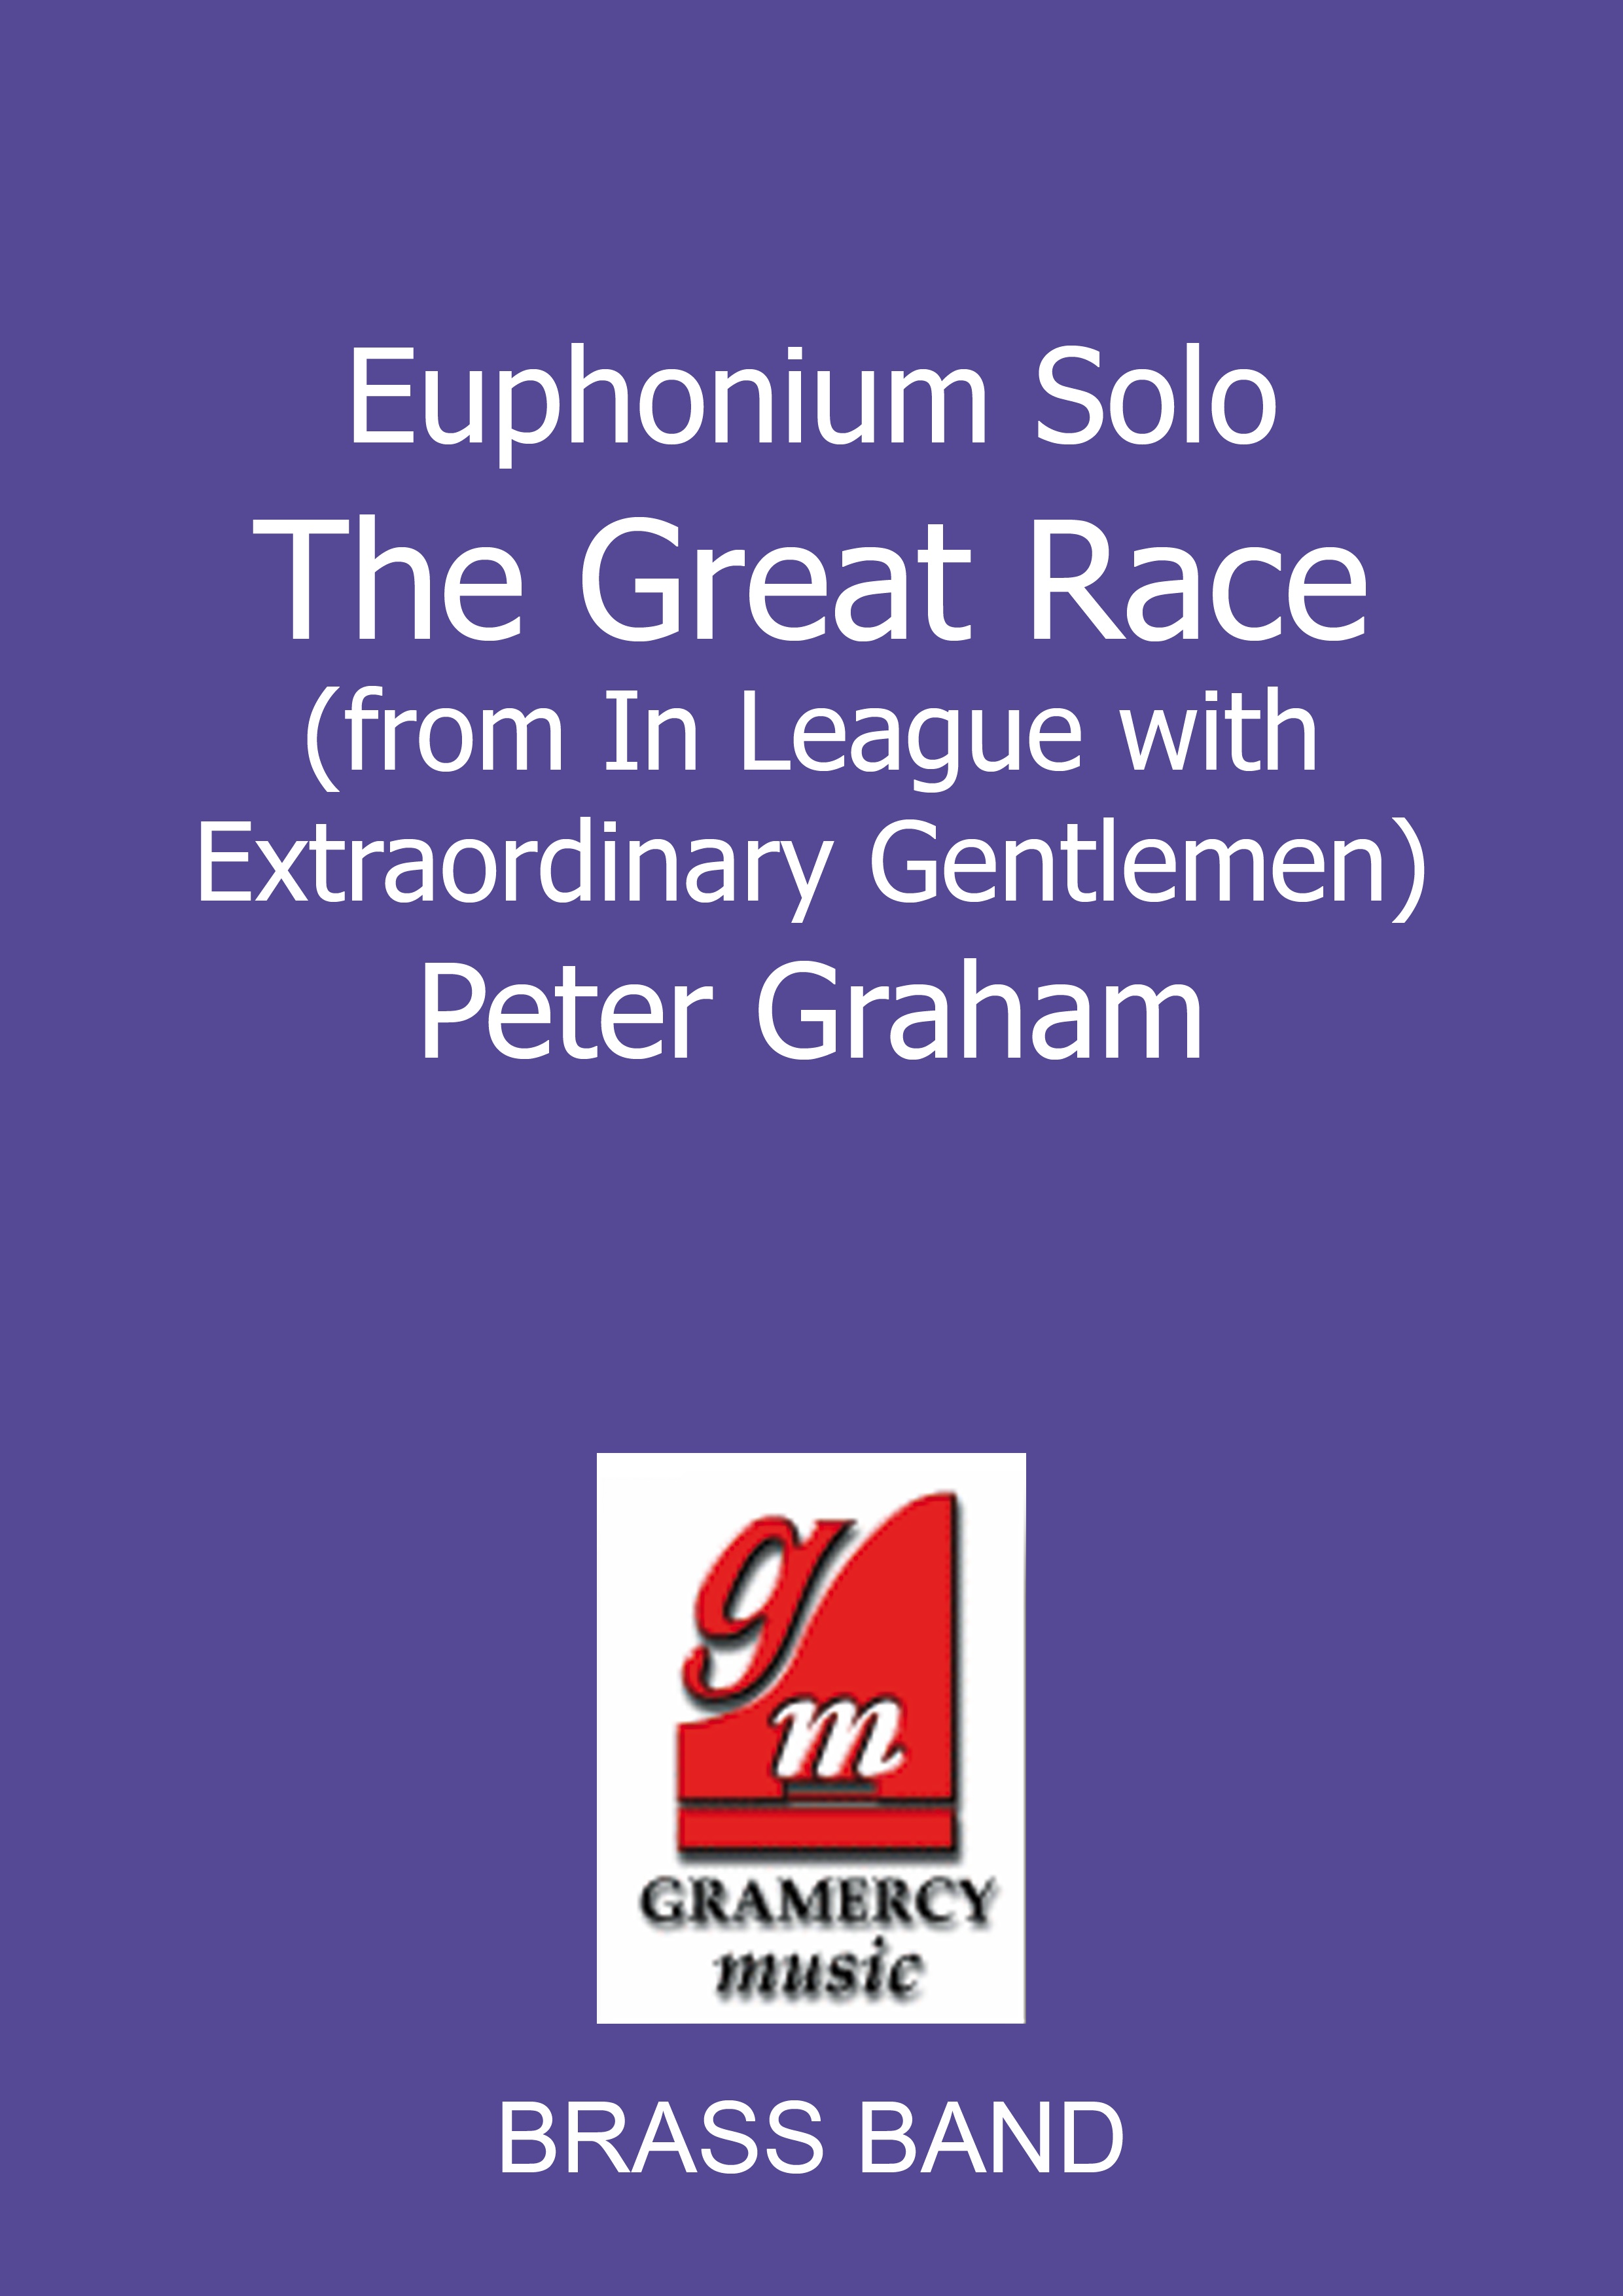 The Great Race (Euphonium Solo with Brass Band)